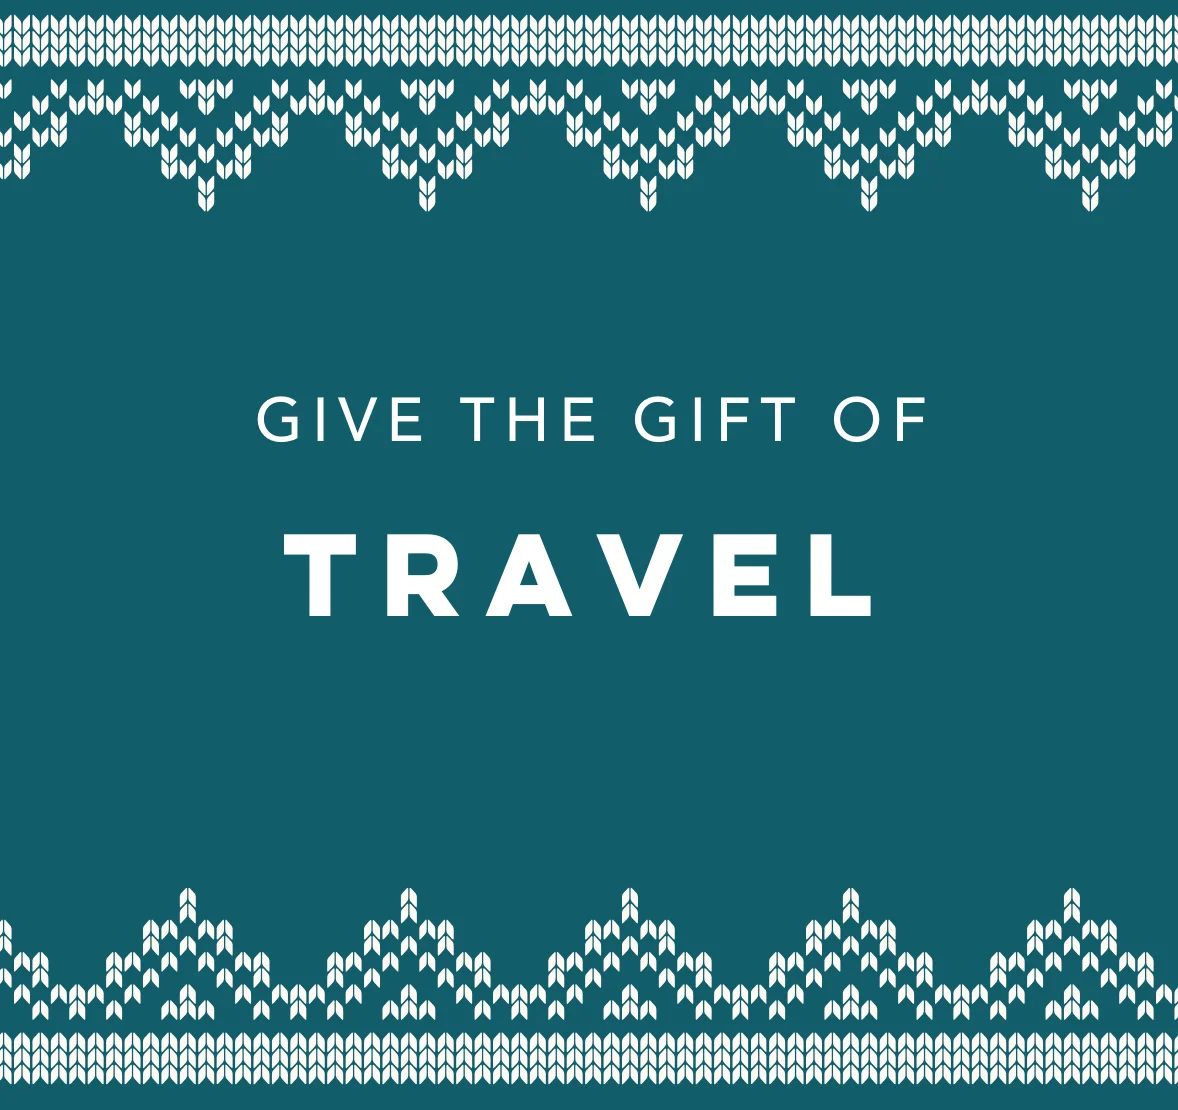 The gift of travel